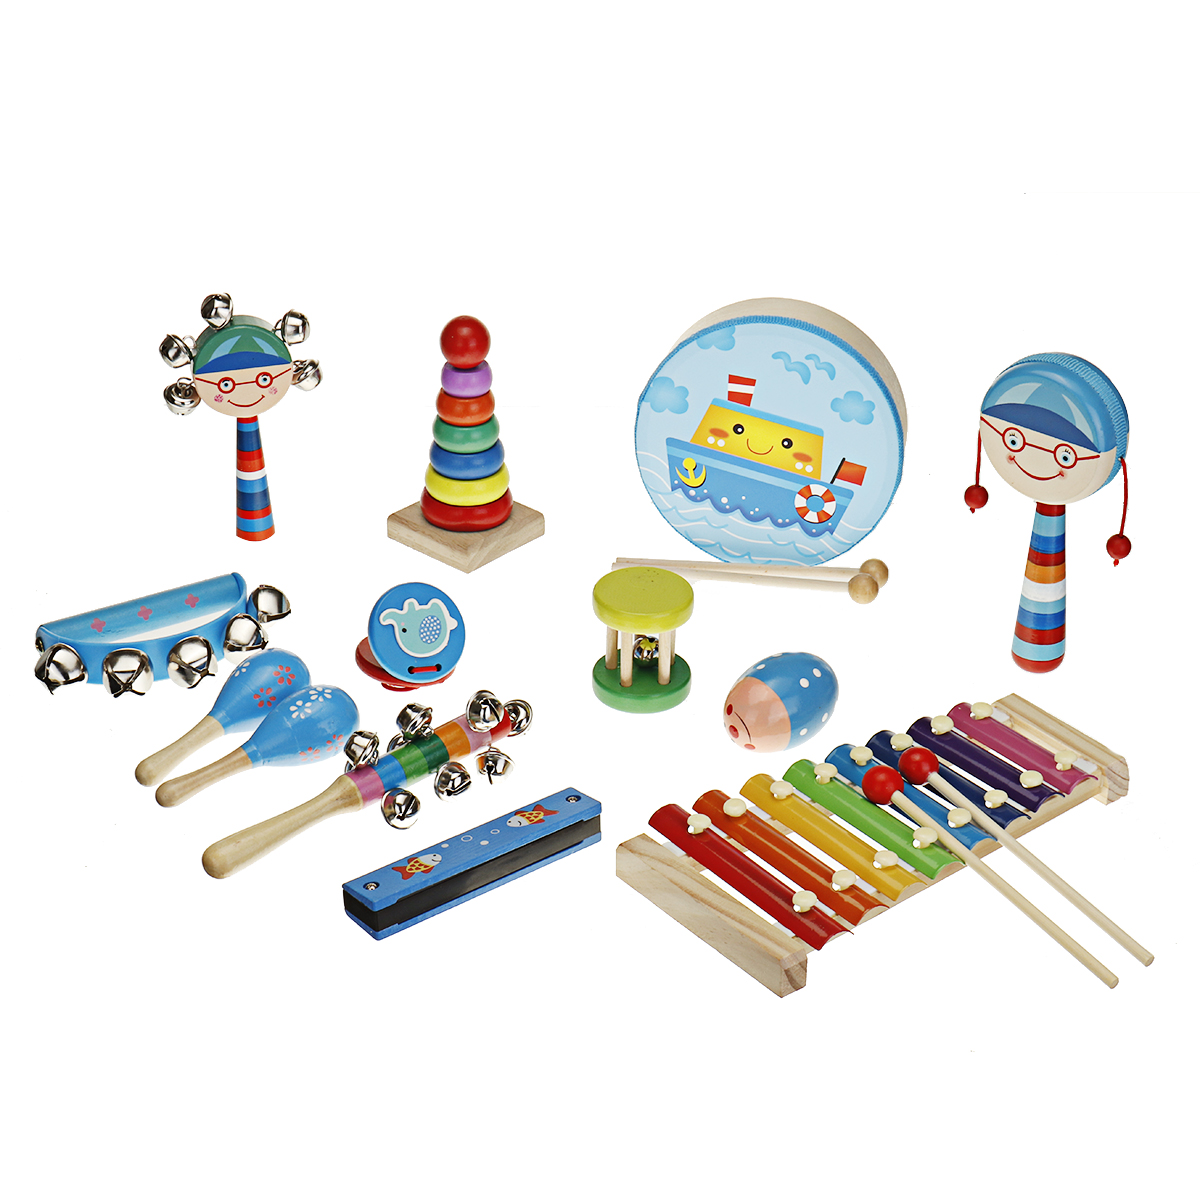 713-Pcs-Colorful-Musical-Percussion-Safe-Non-toxic-Instruments-Kit-Early-Educational-Toy-for-Kids-Gi-1805313-4